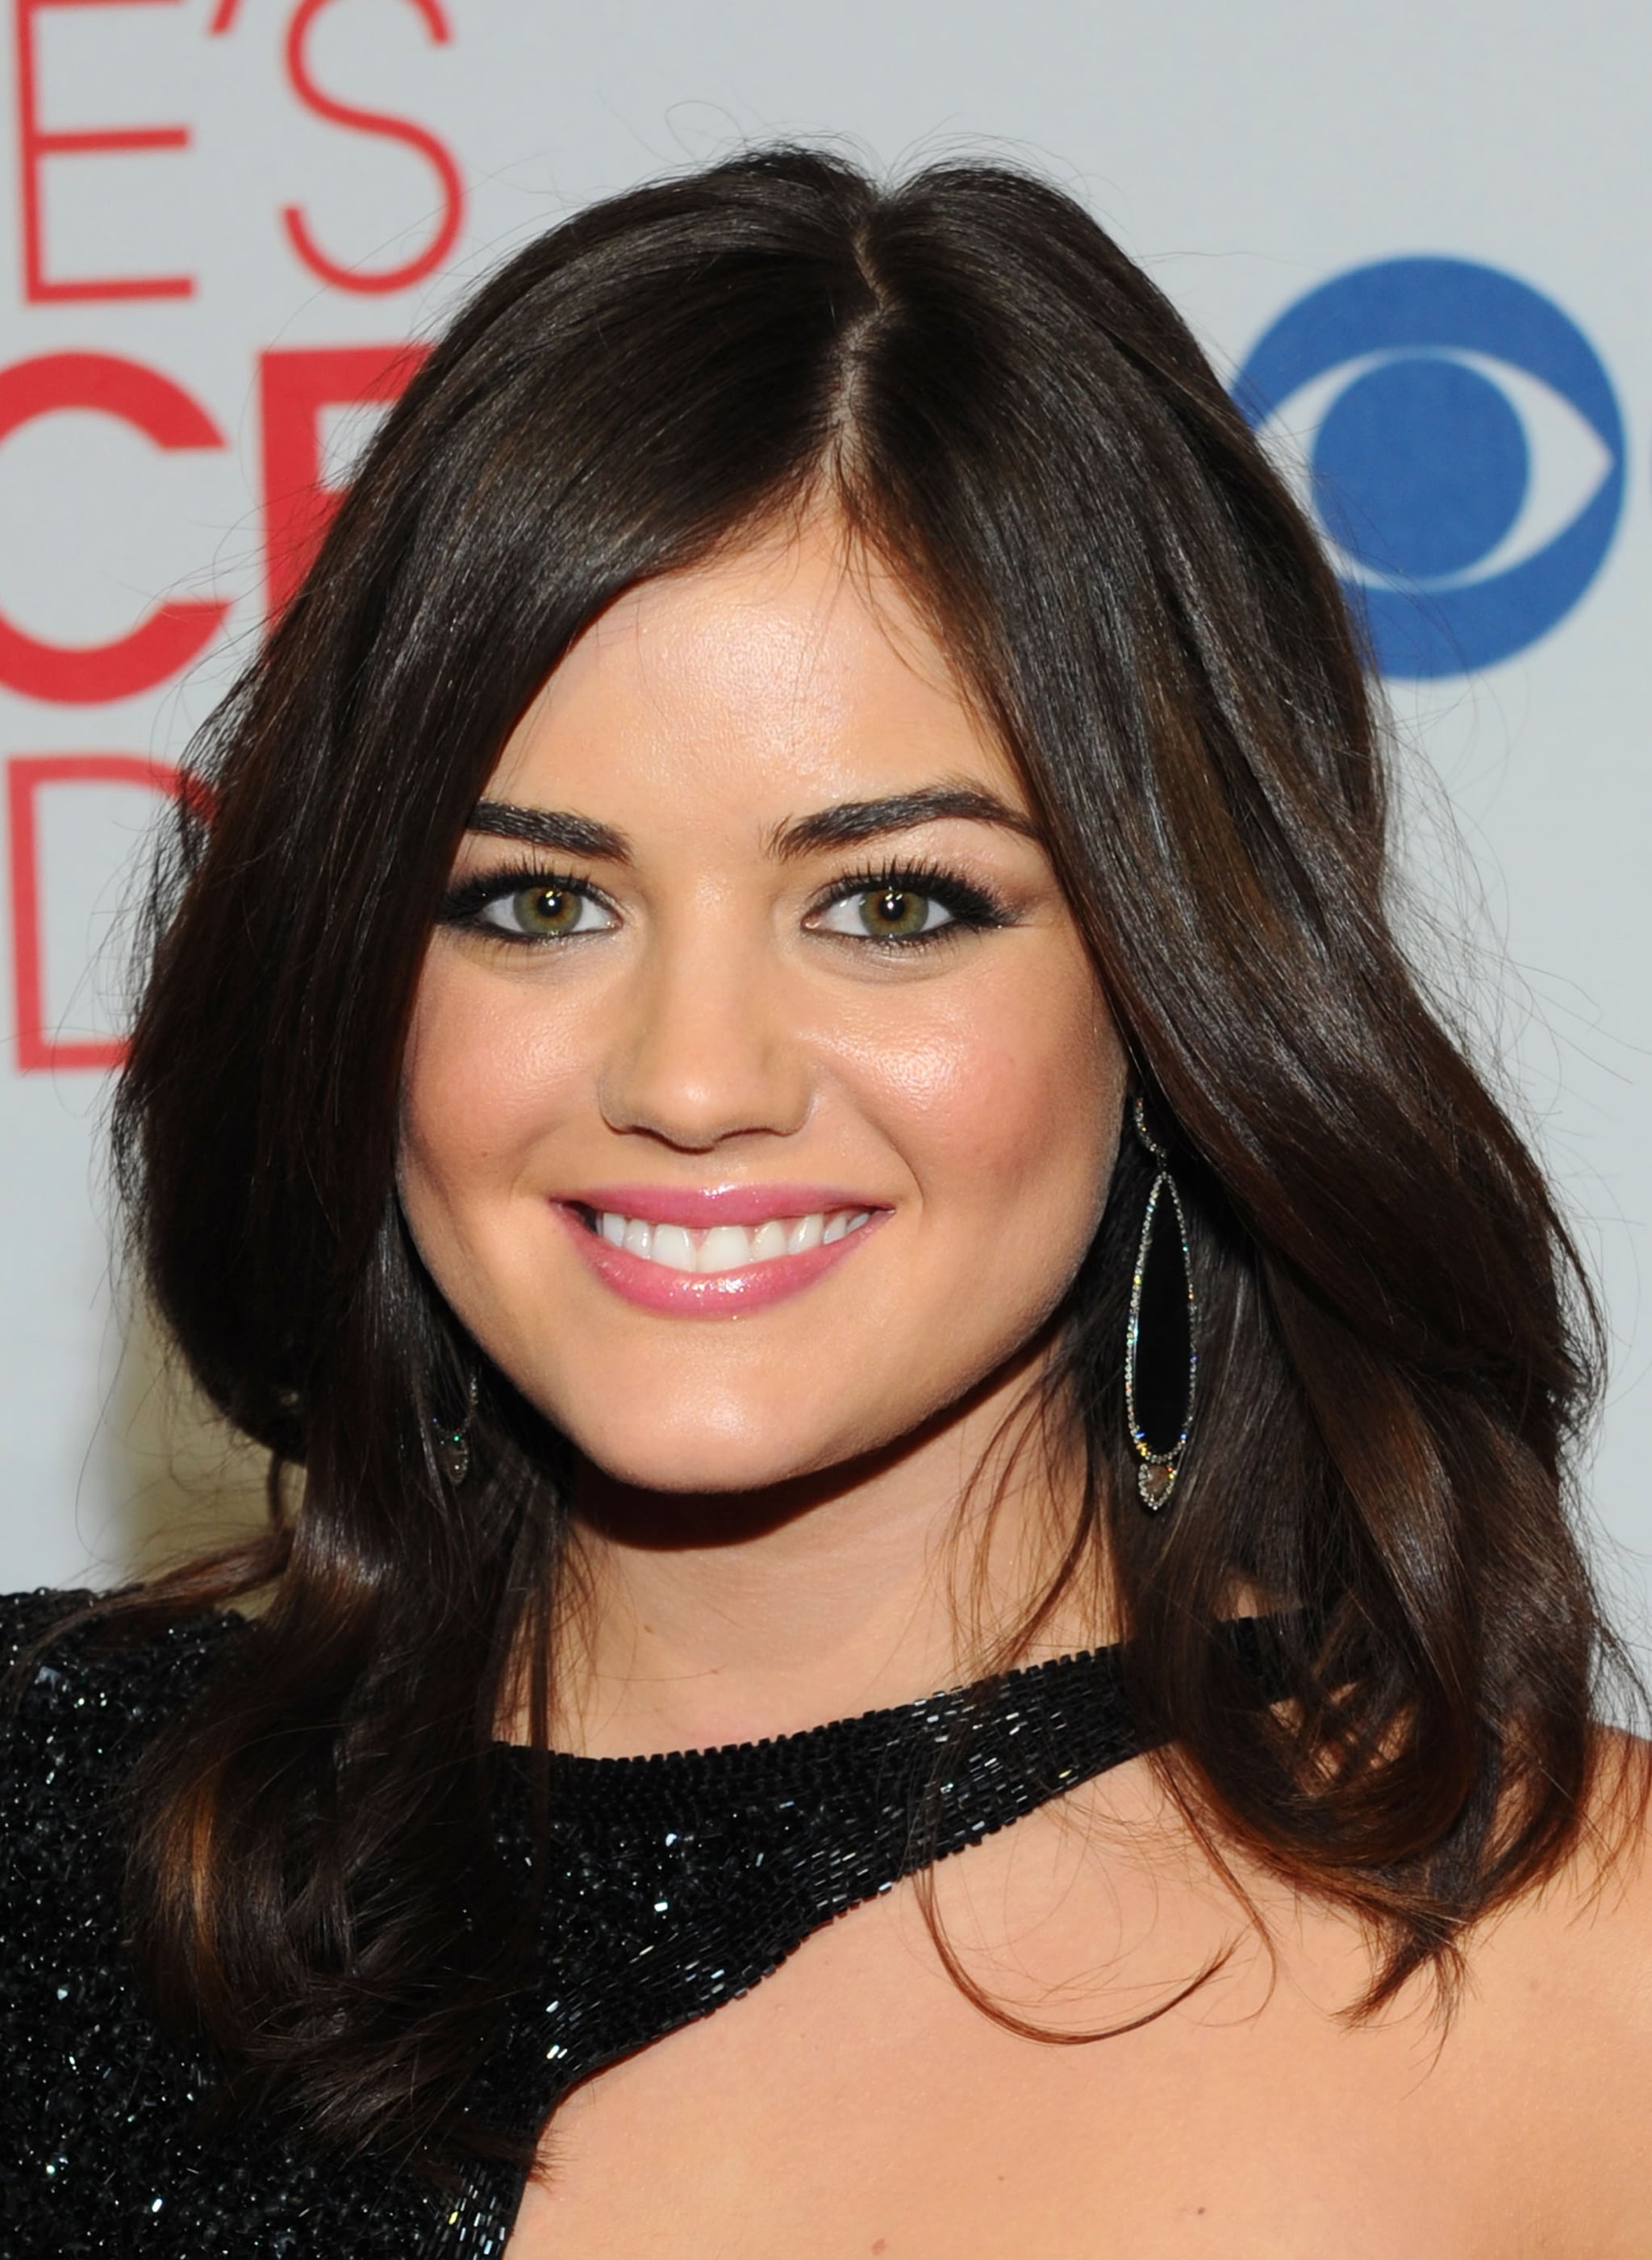 Lucy Hale in a cutout dress at the People's Choice Awards.